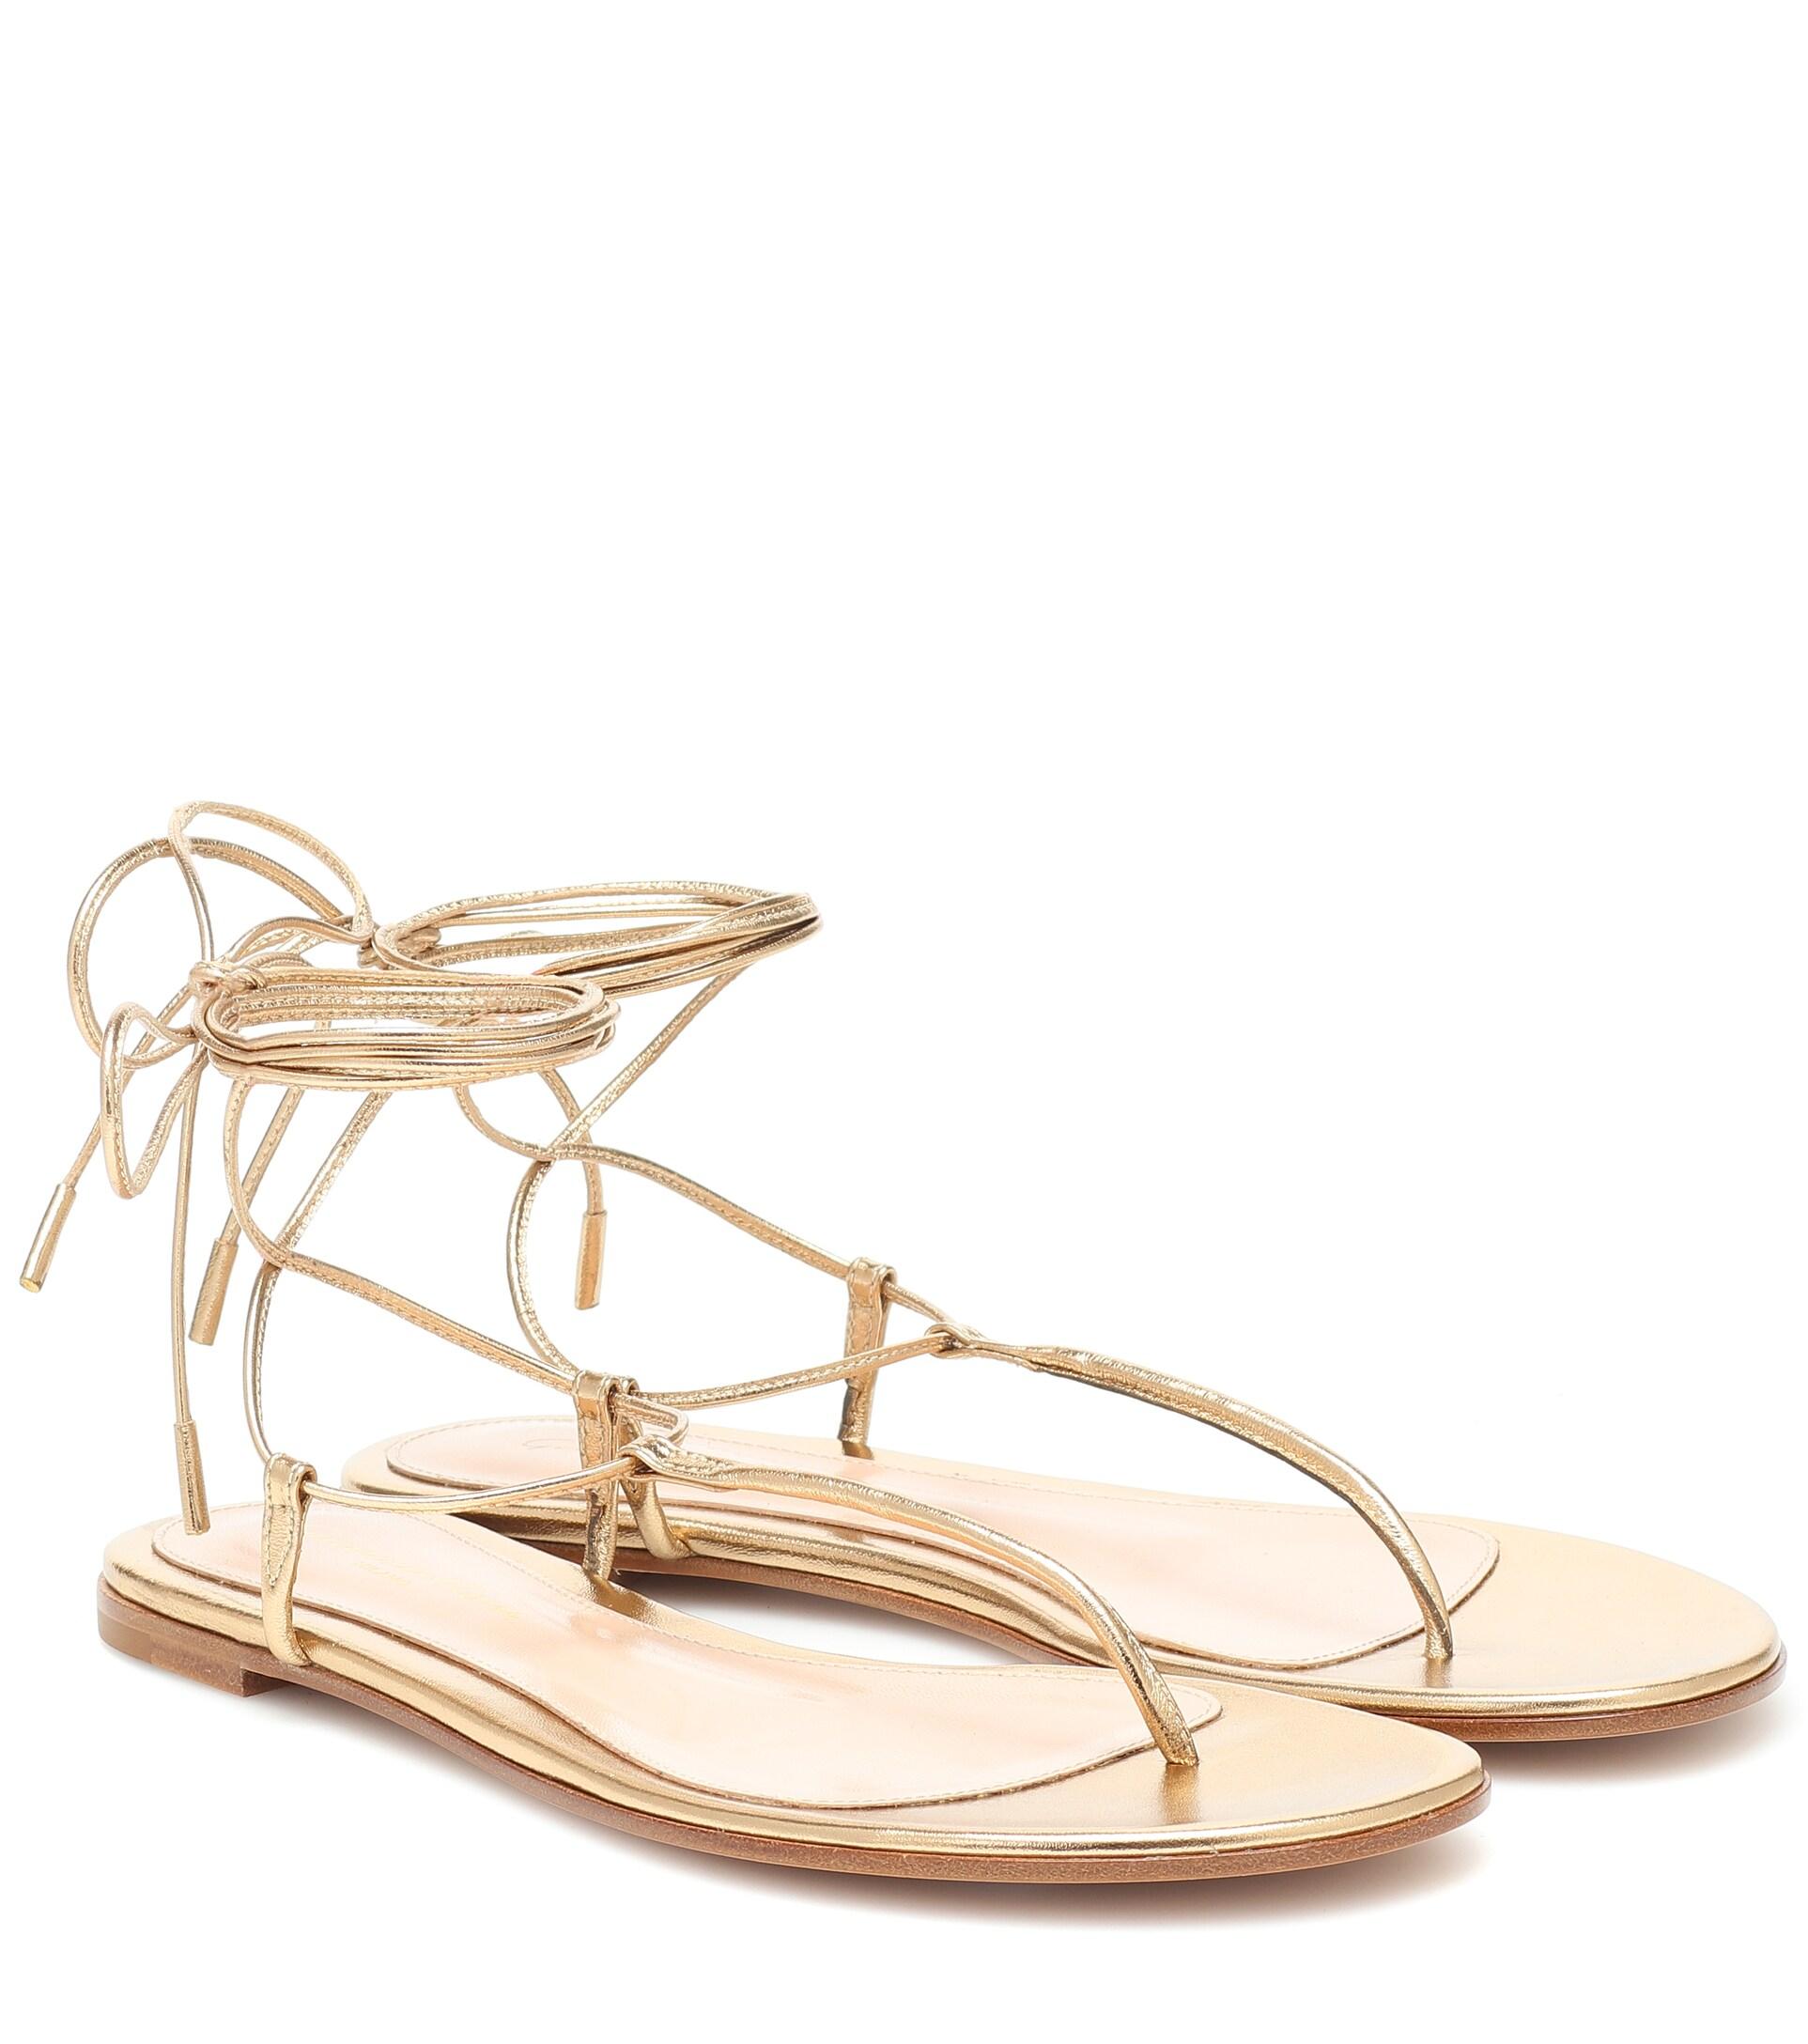 Gianvito Rossi Gwyneth Thong Sandals in Natural | Lyst